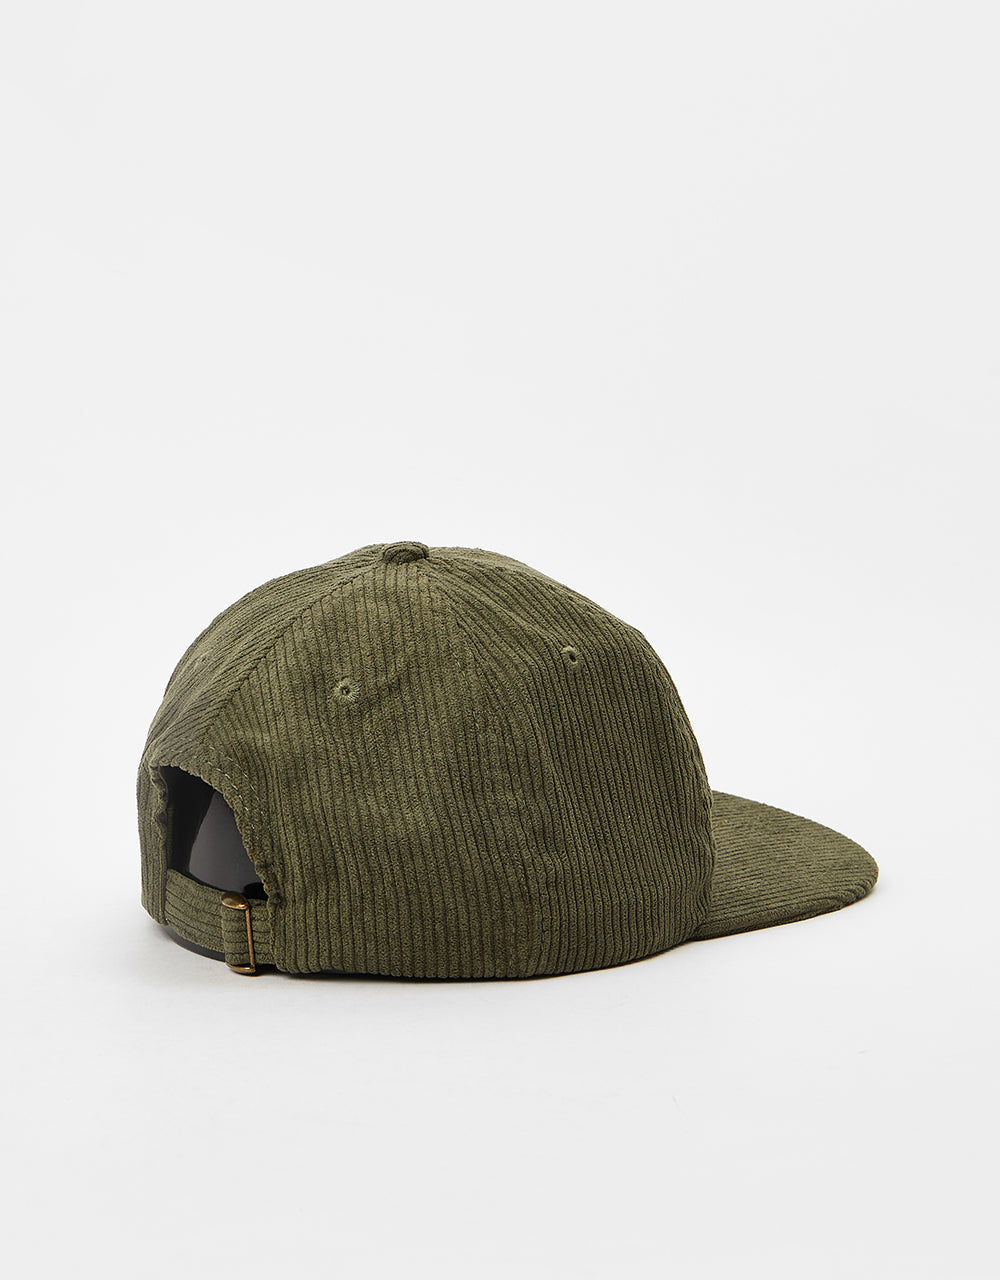 Route One Unstructured Cord 6 Panel Cap - Forest Green